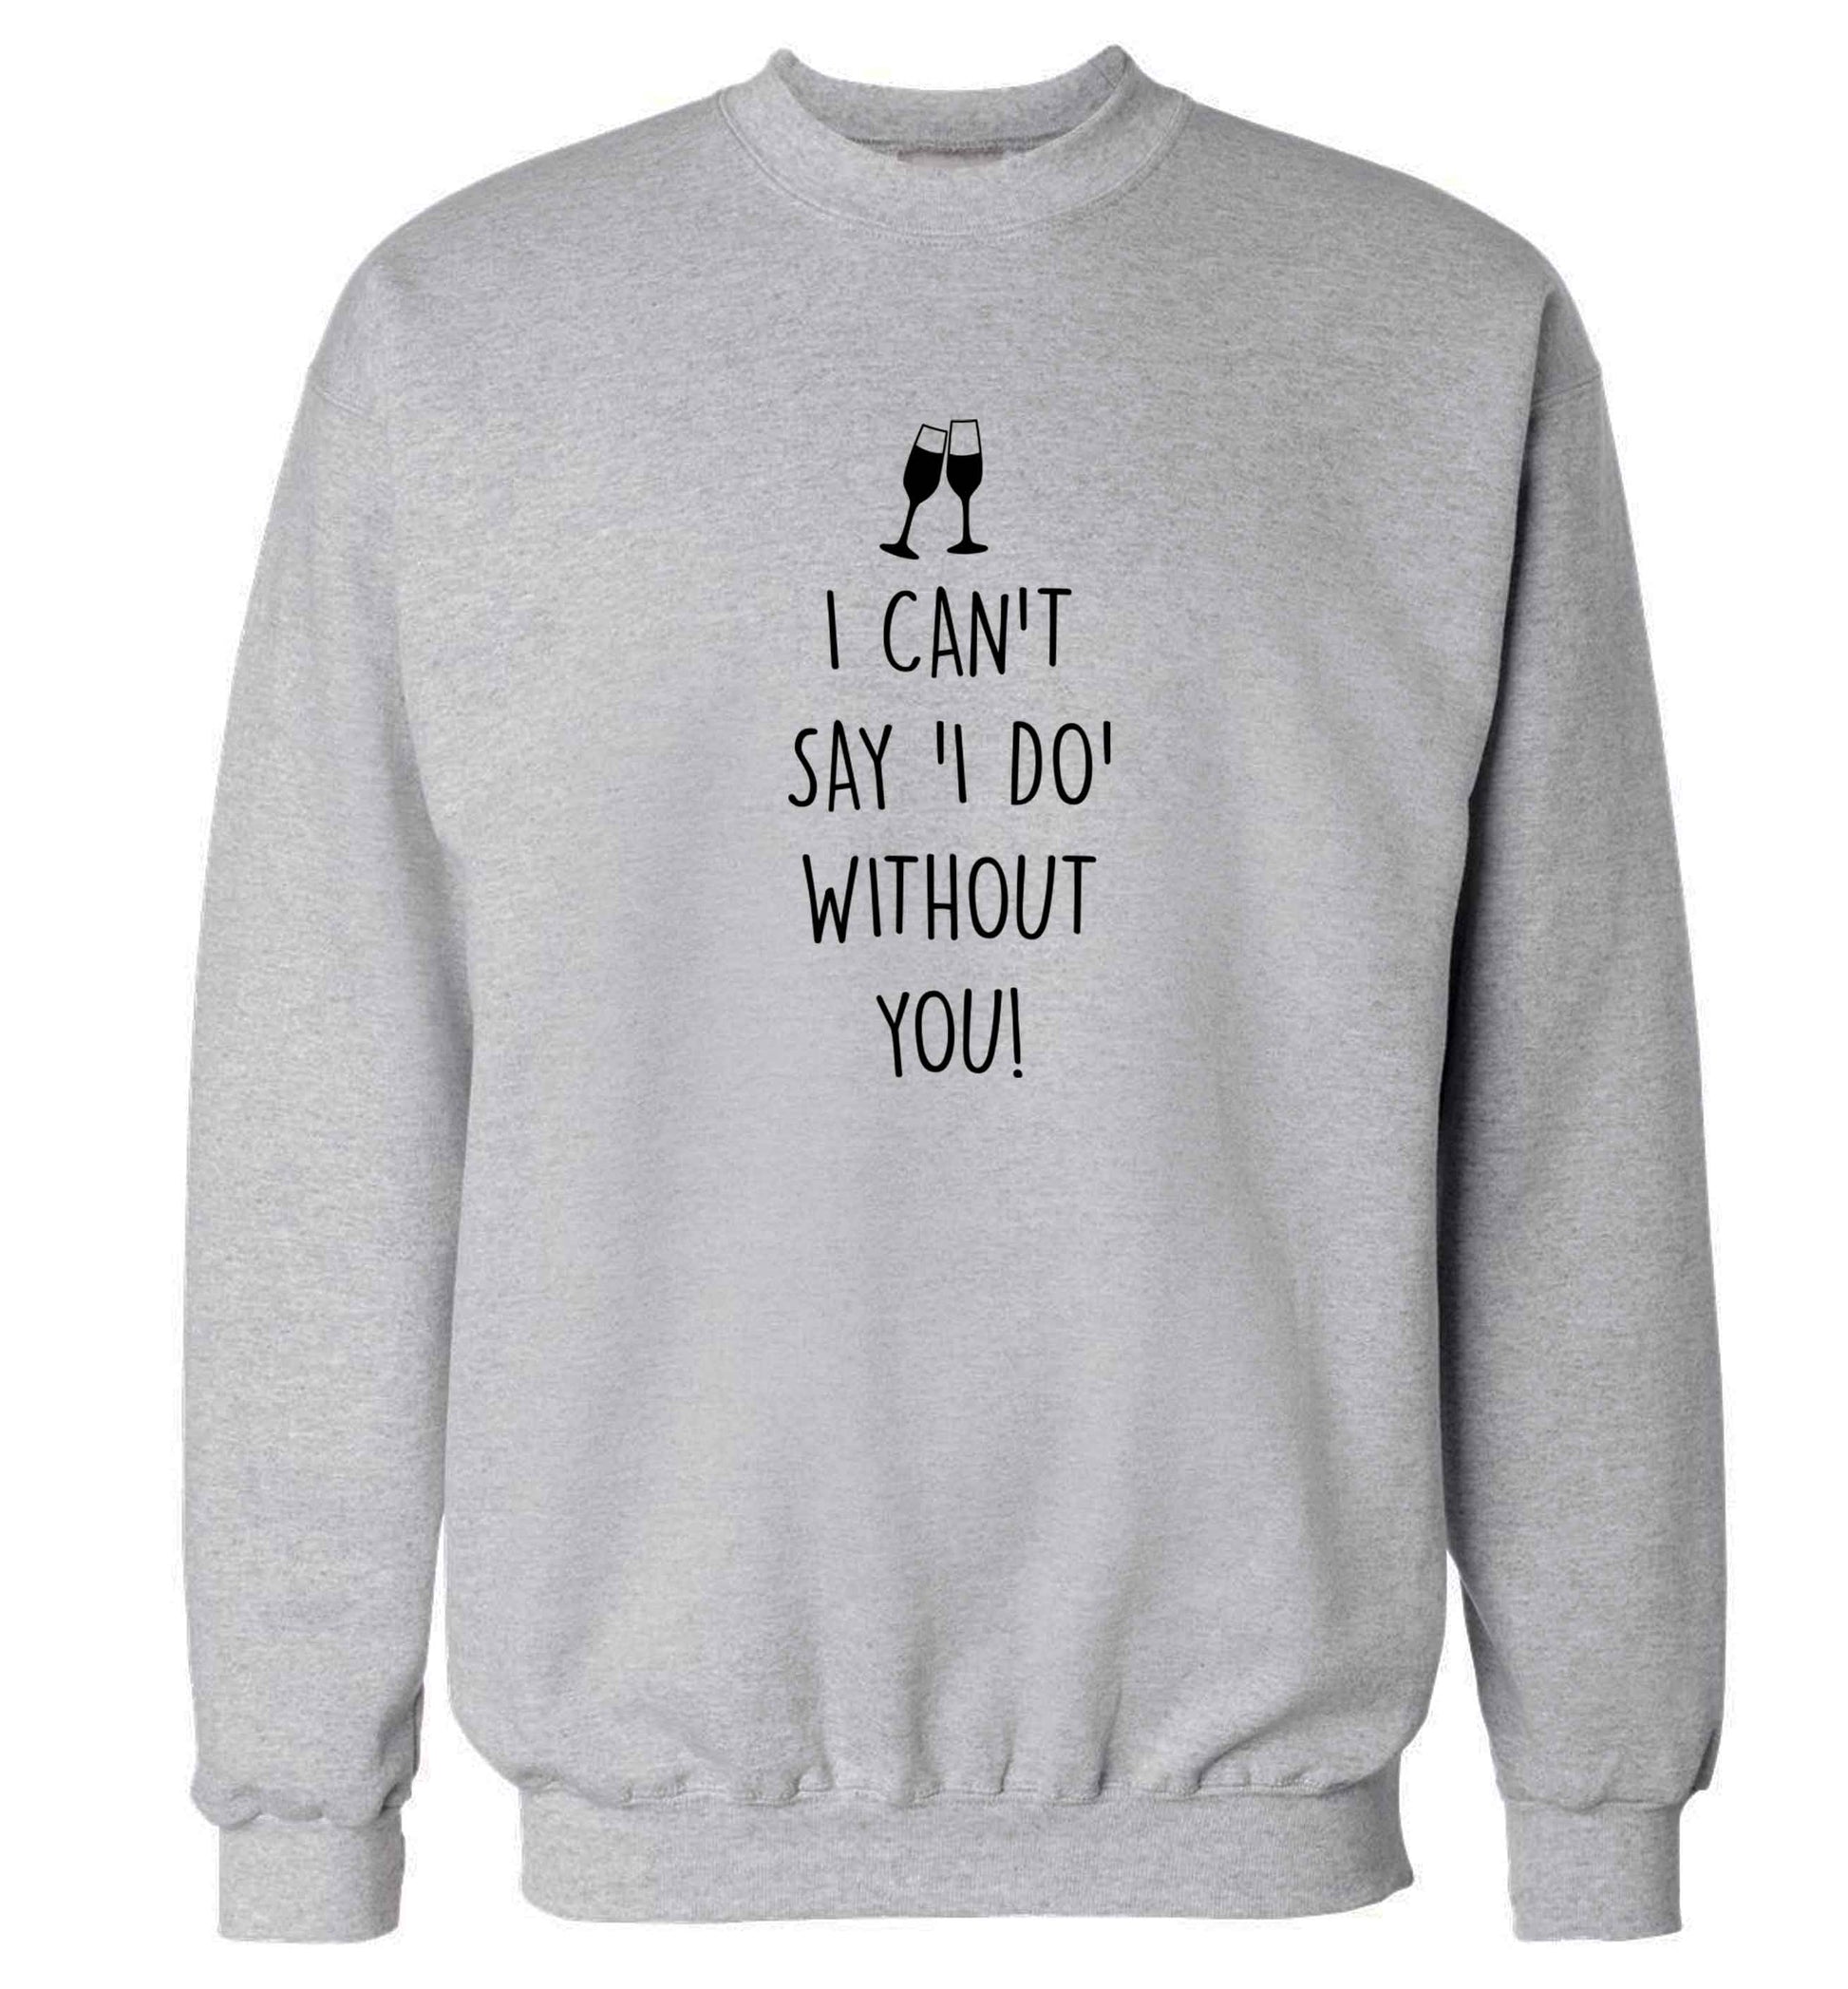 I can't say 'I do' without you! adult's unisex grey sweater 2XL